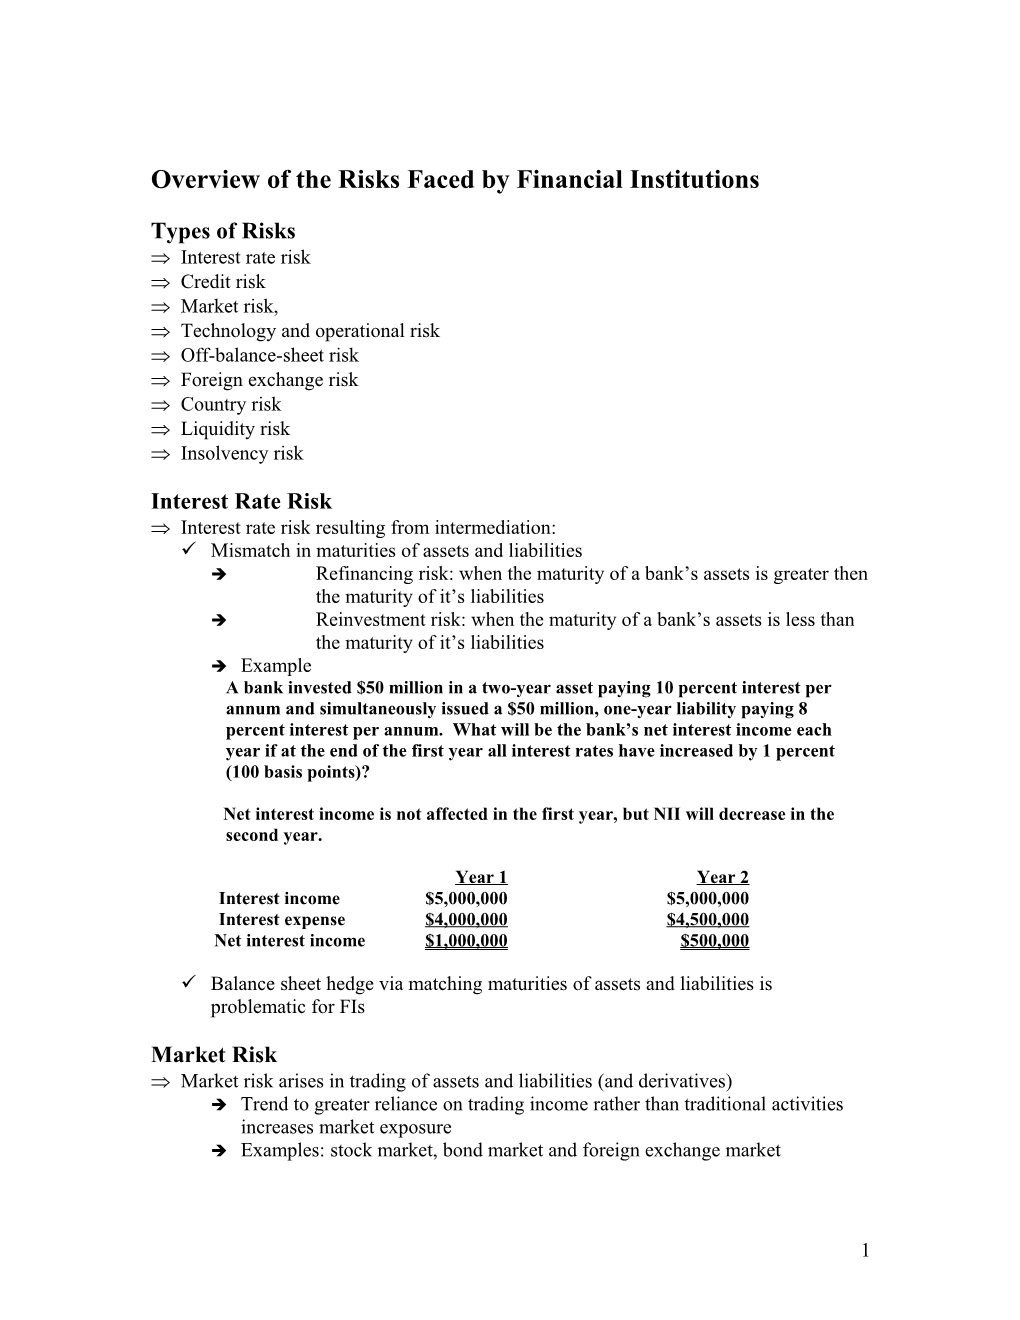 Overview of the Risks Faced by Financial Institutions